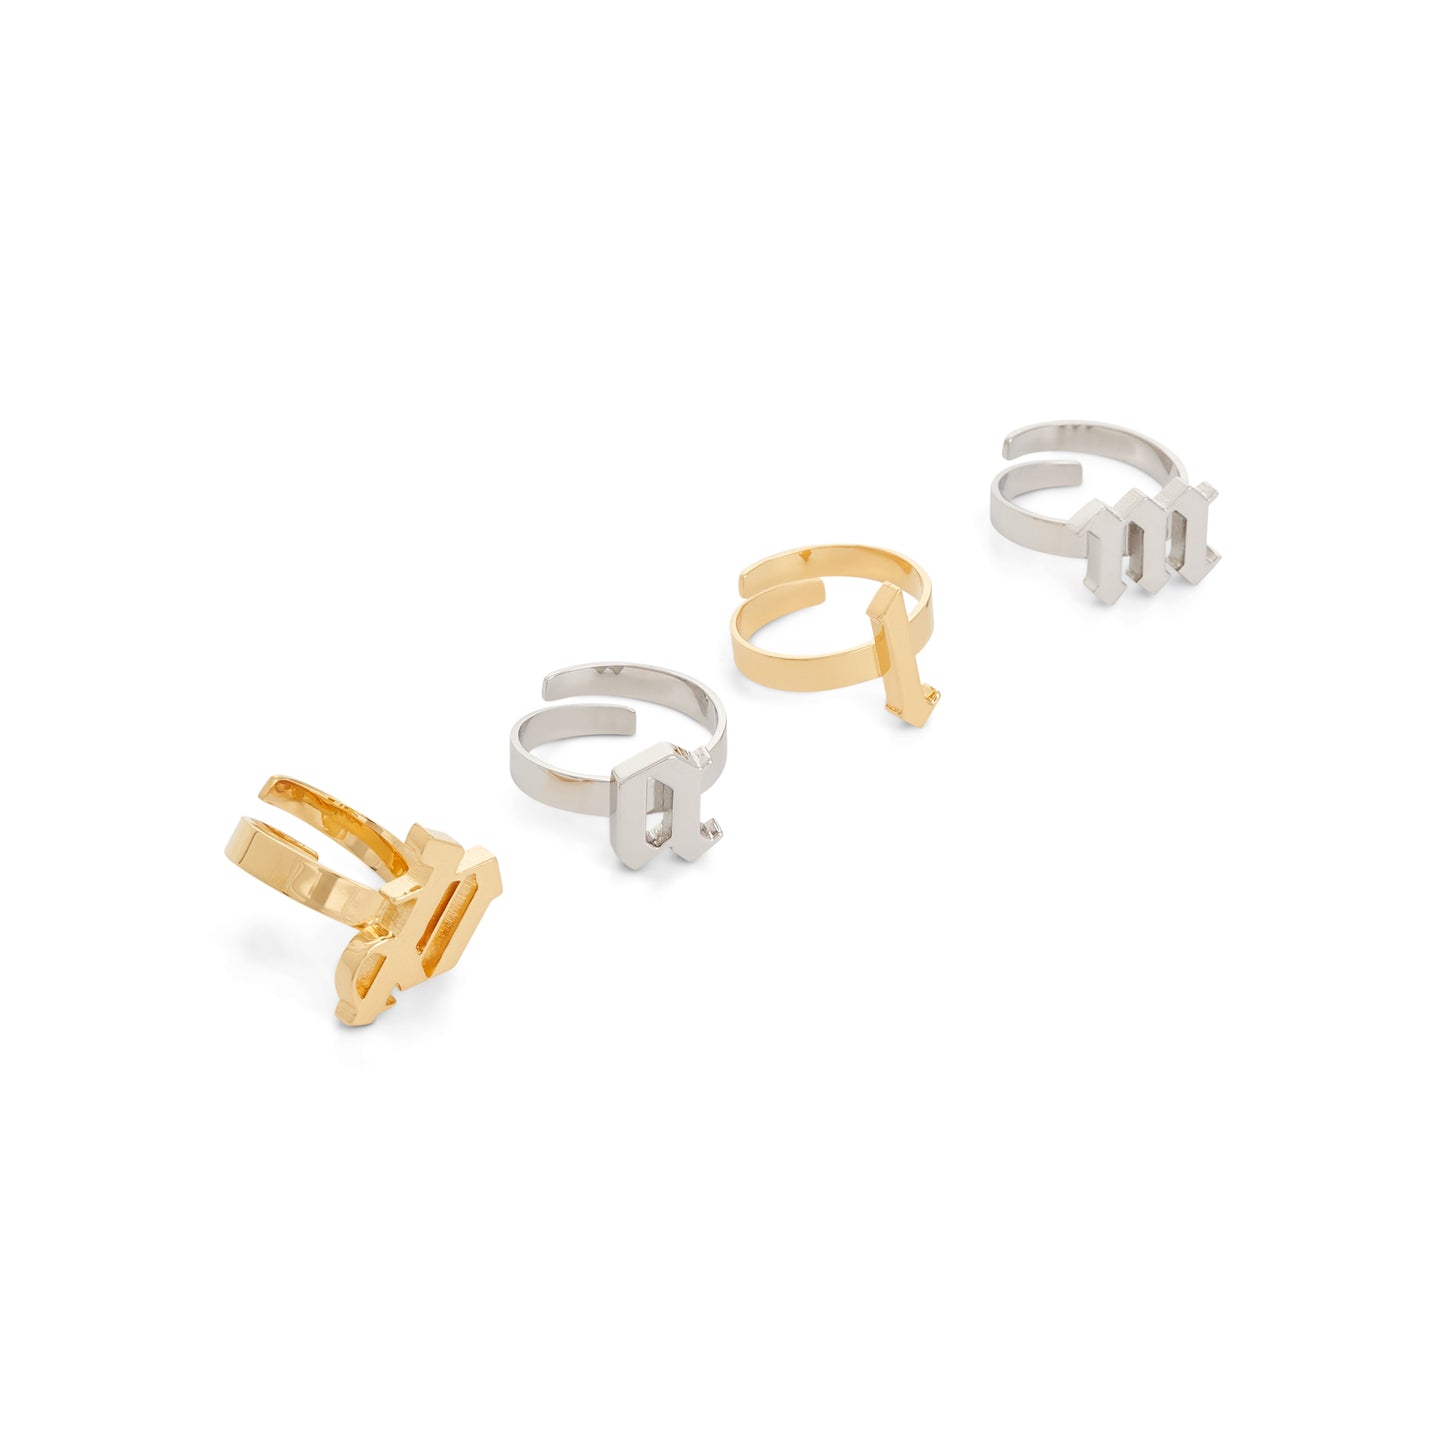 Bicolour Palm Ring Set in Gold/Silver